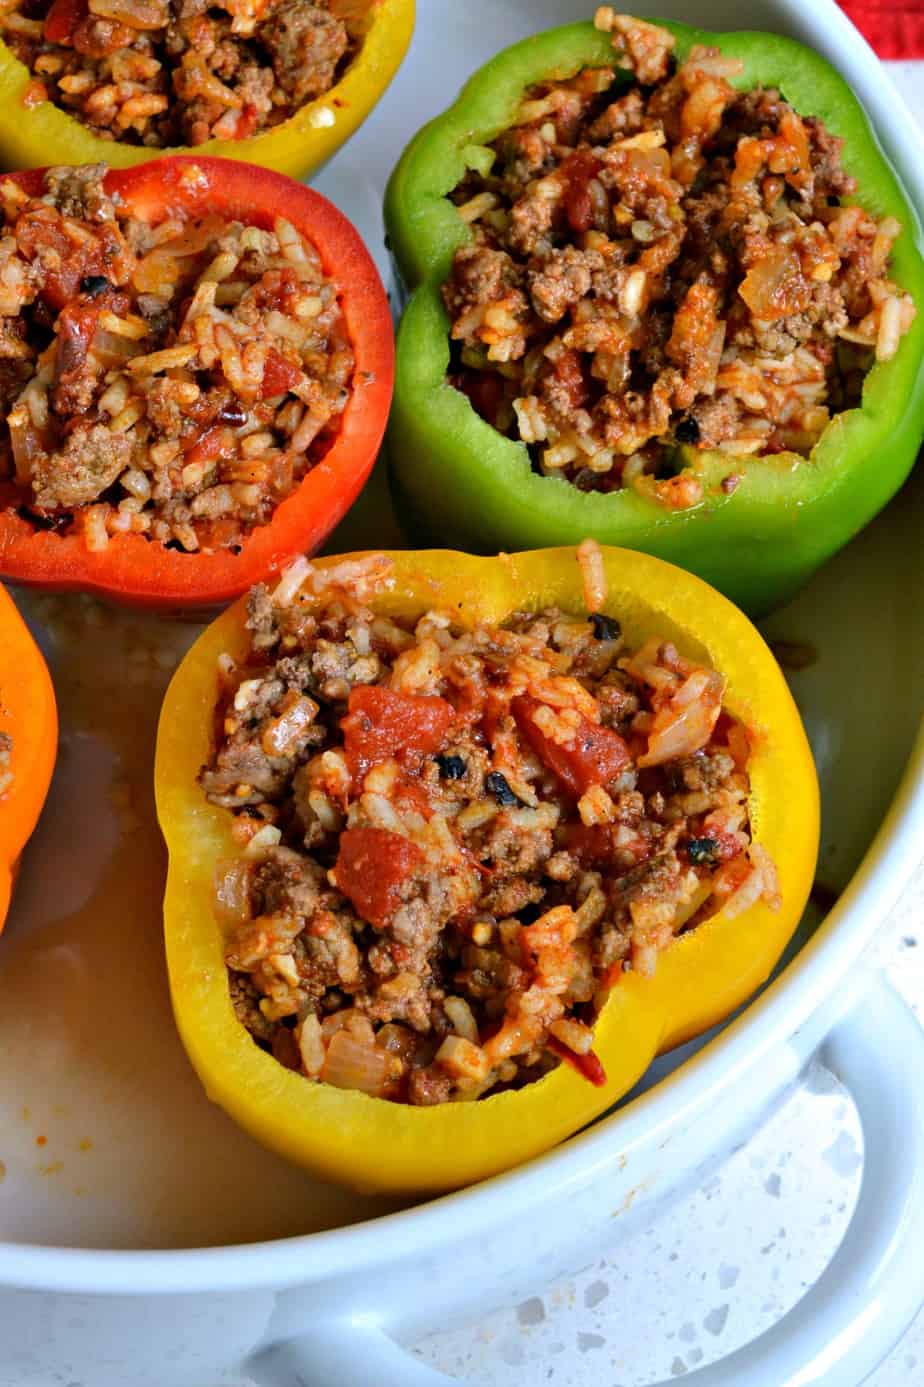 How to make Mexican Stuffed Peppers